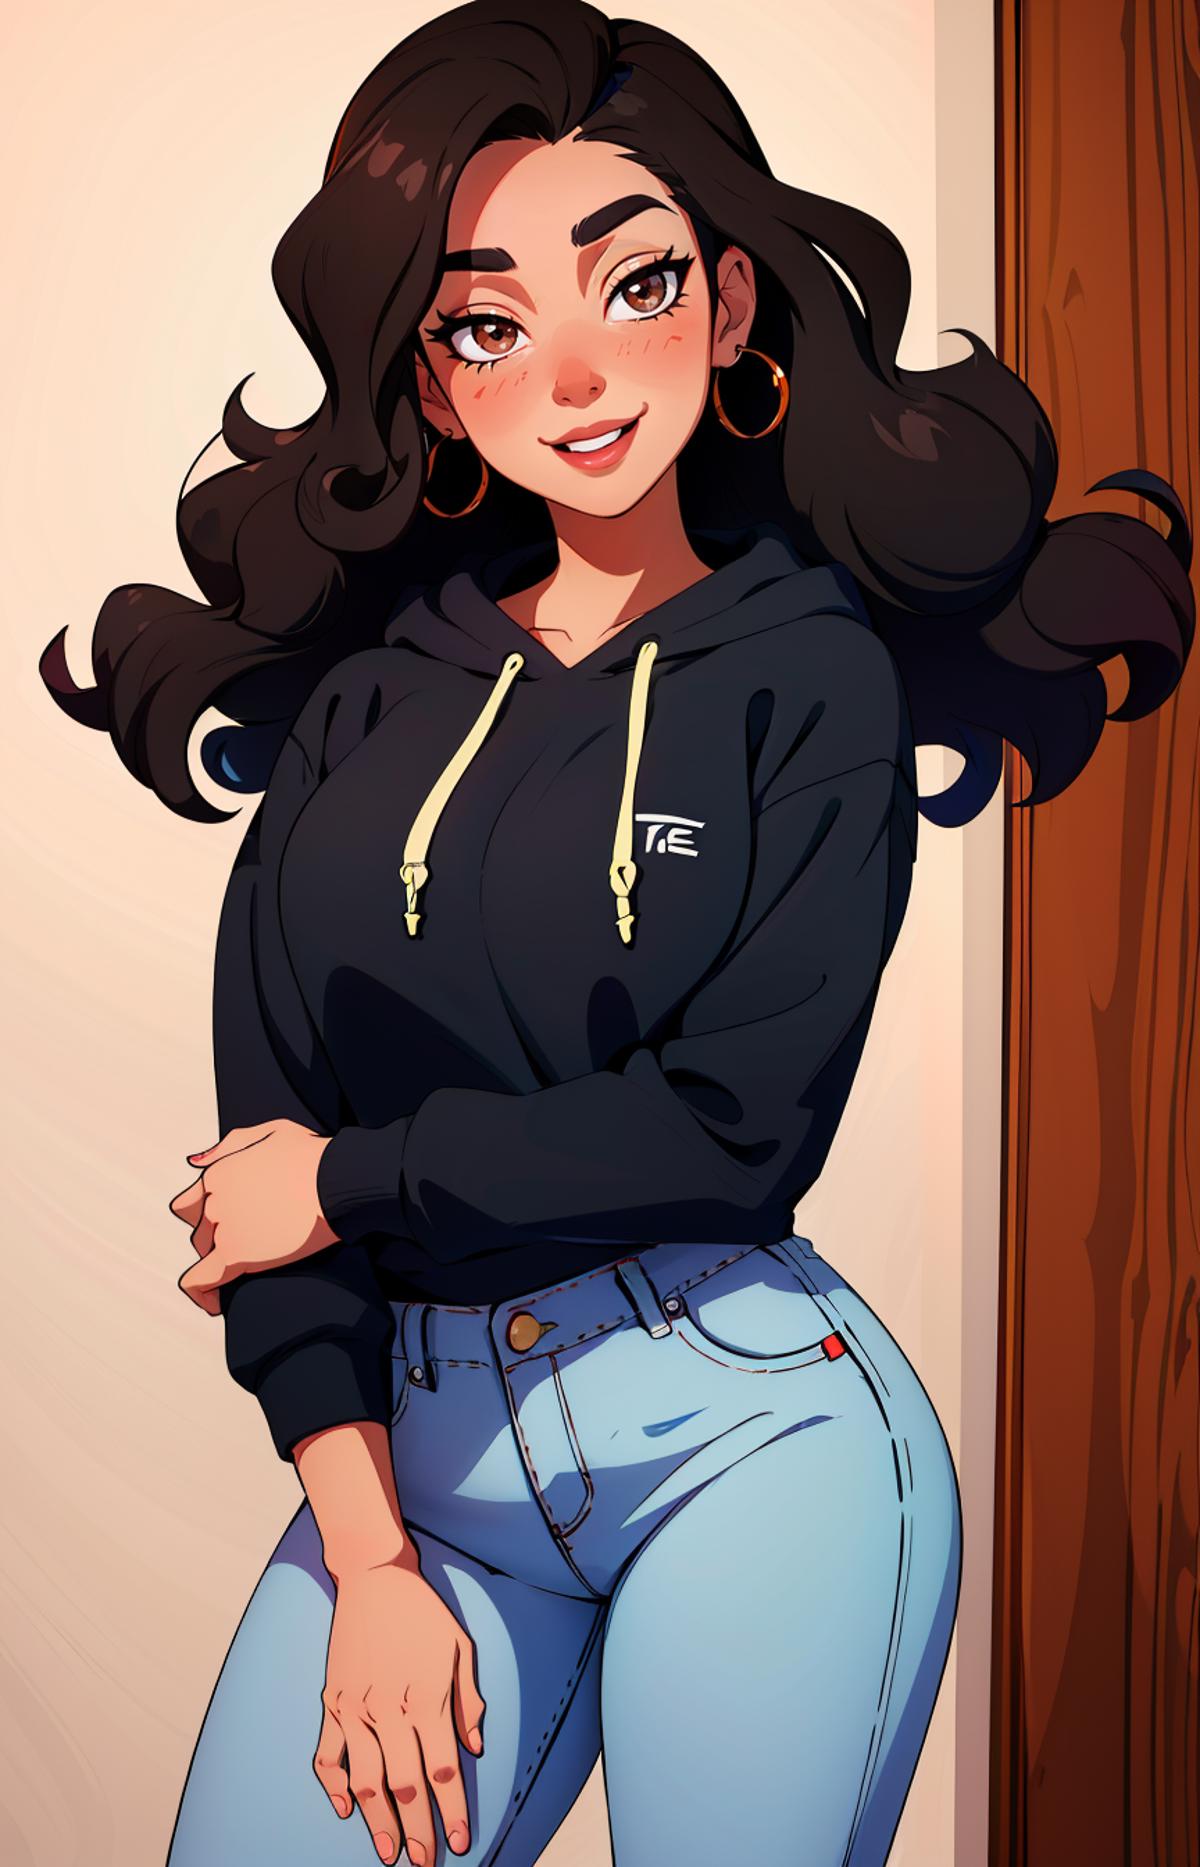 A cartoon image of a beautiful woman wearing a hoodie with a logo that says TEC.